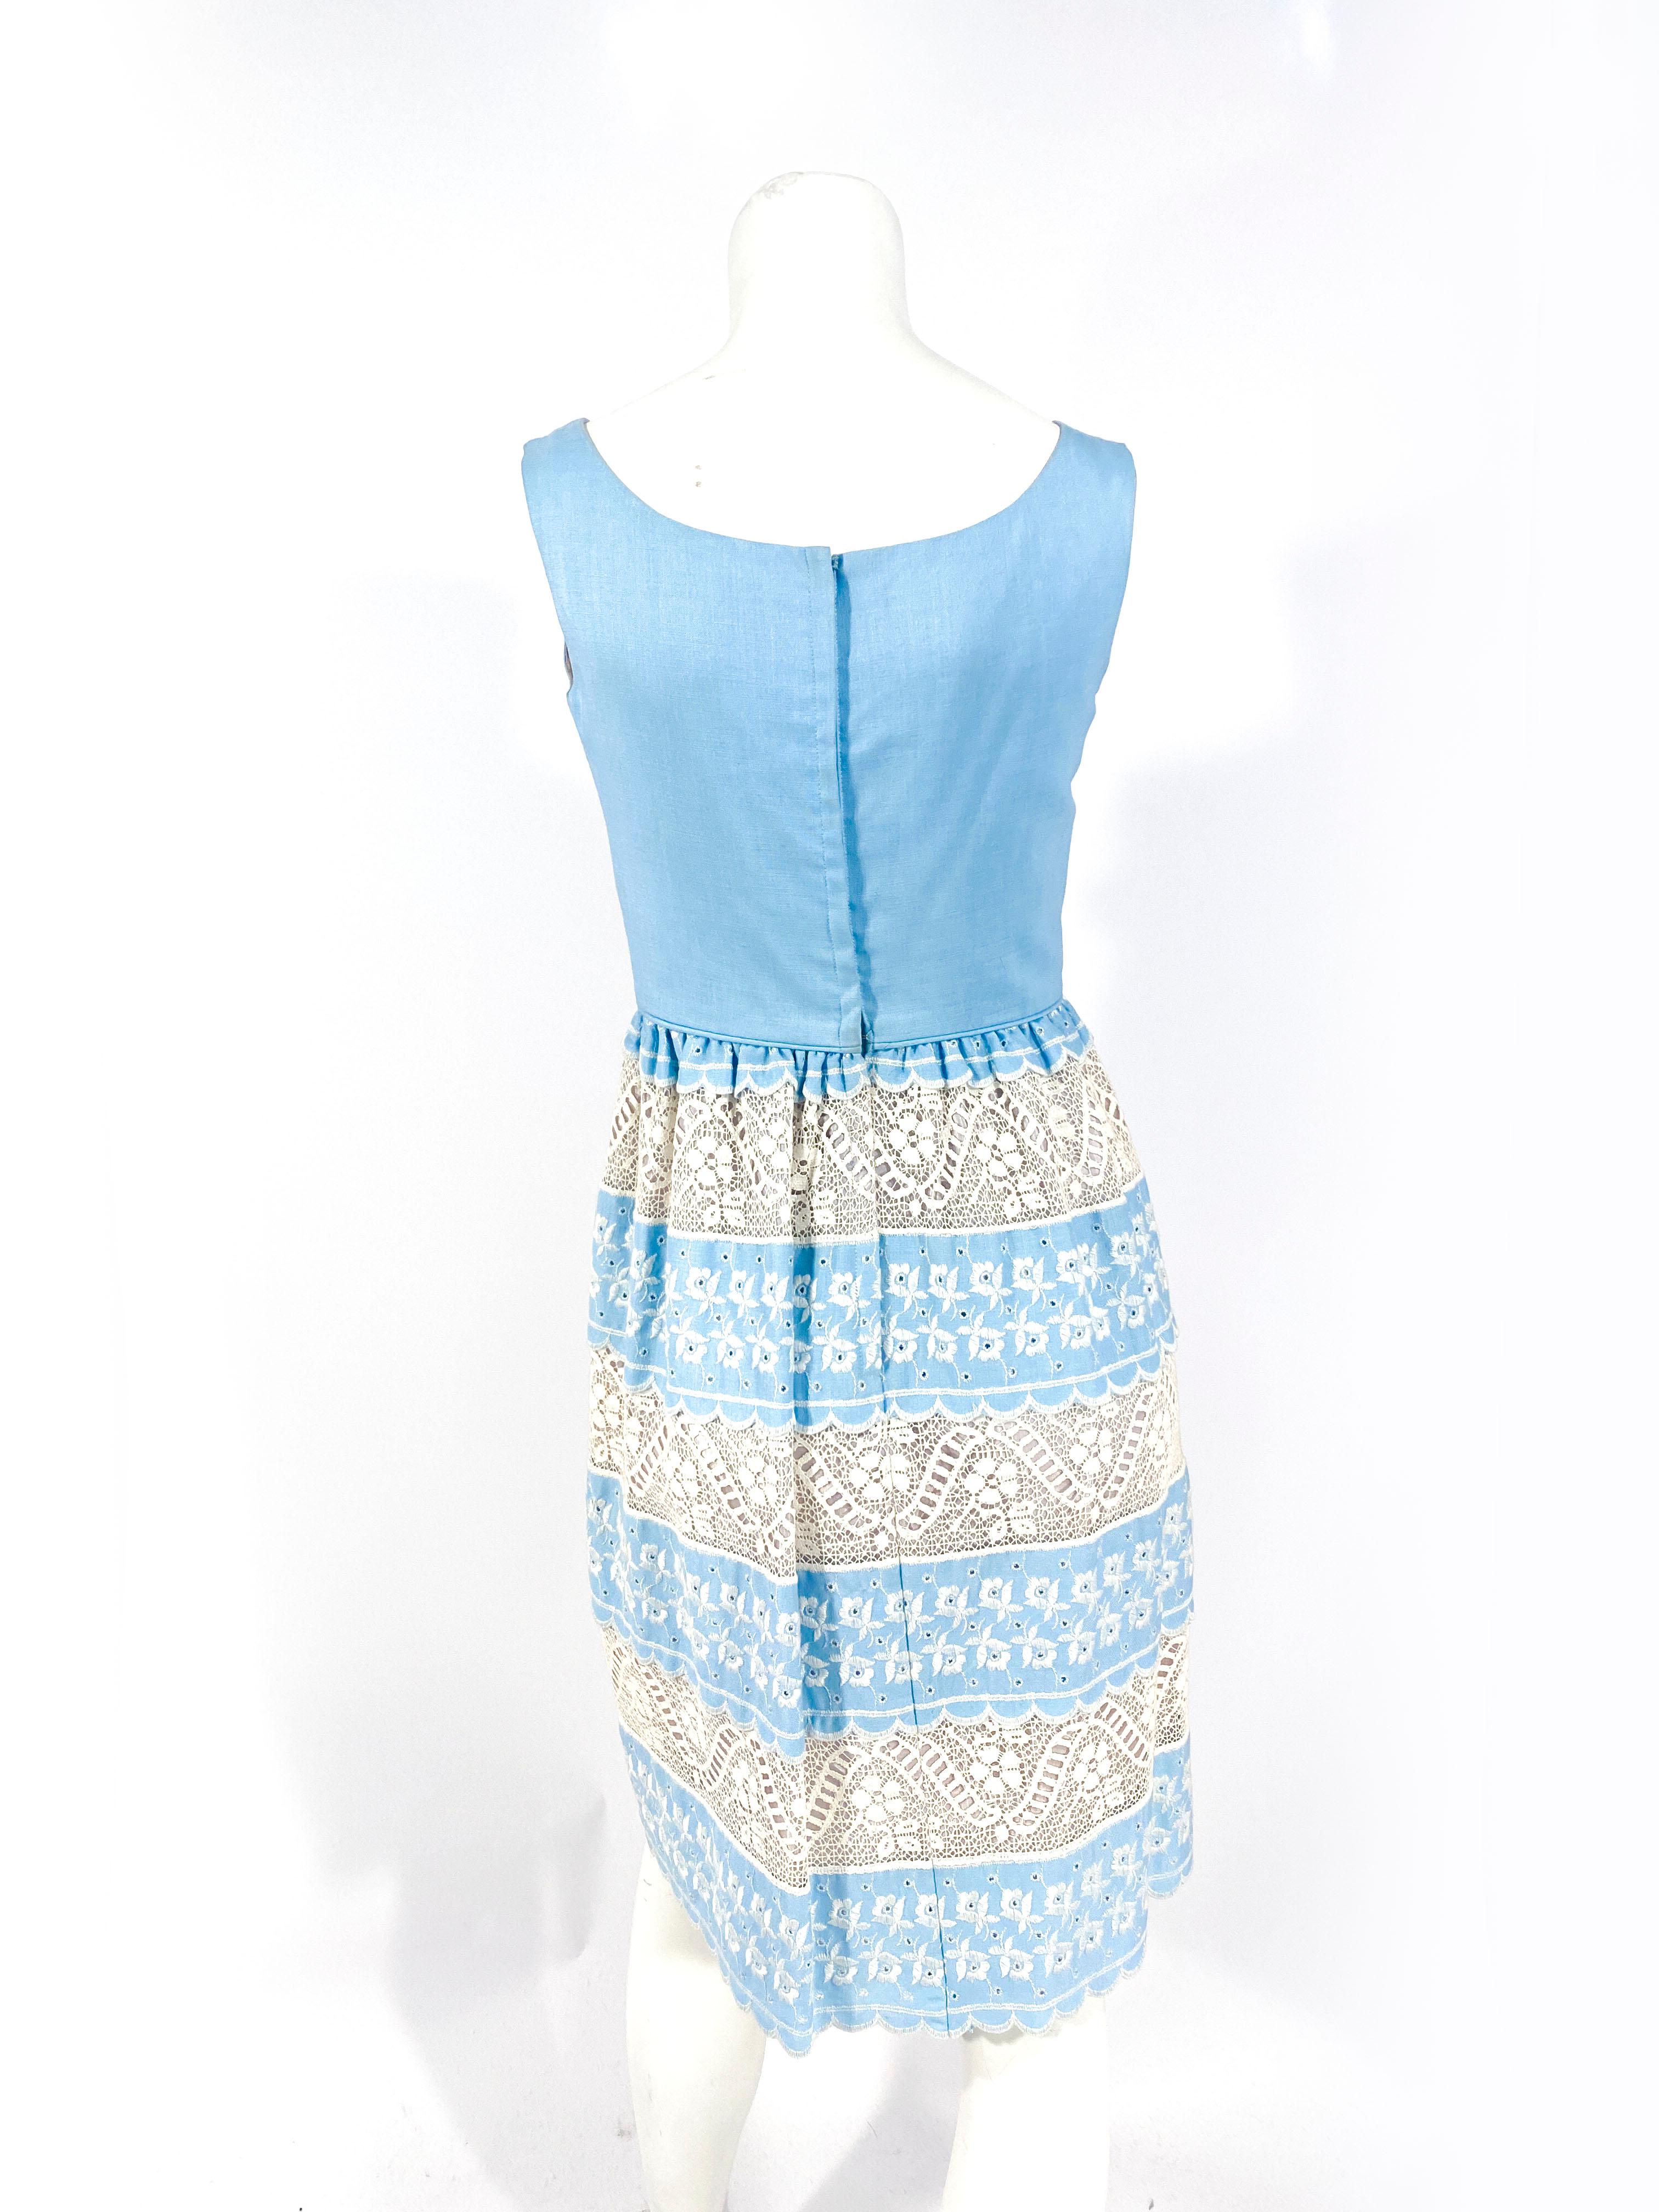 Women's or Men's 1960s Baby Blue Lace and Embroidered Sleeveless Dress